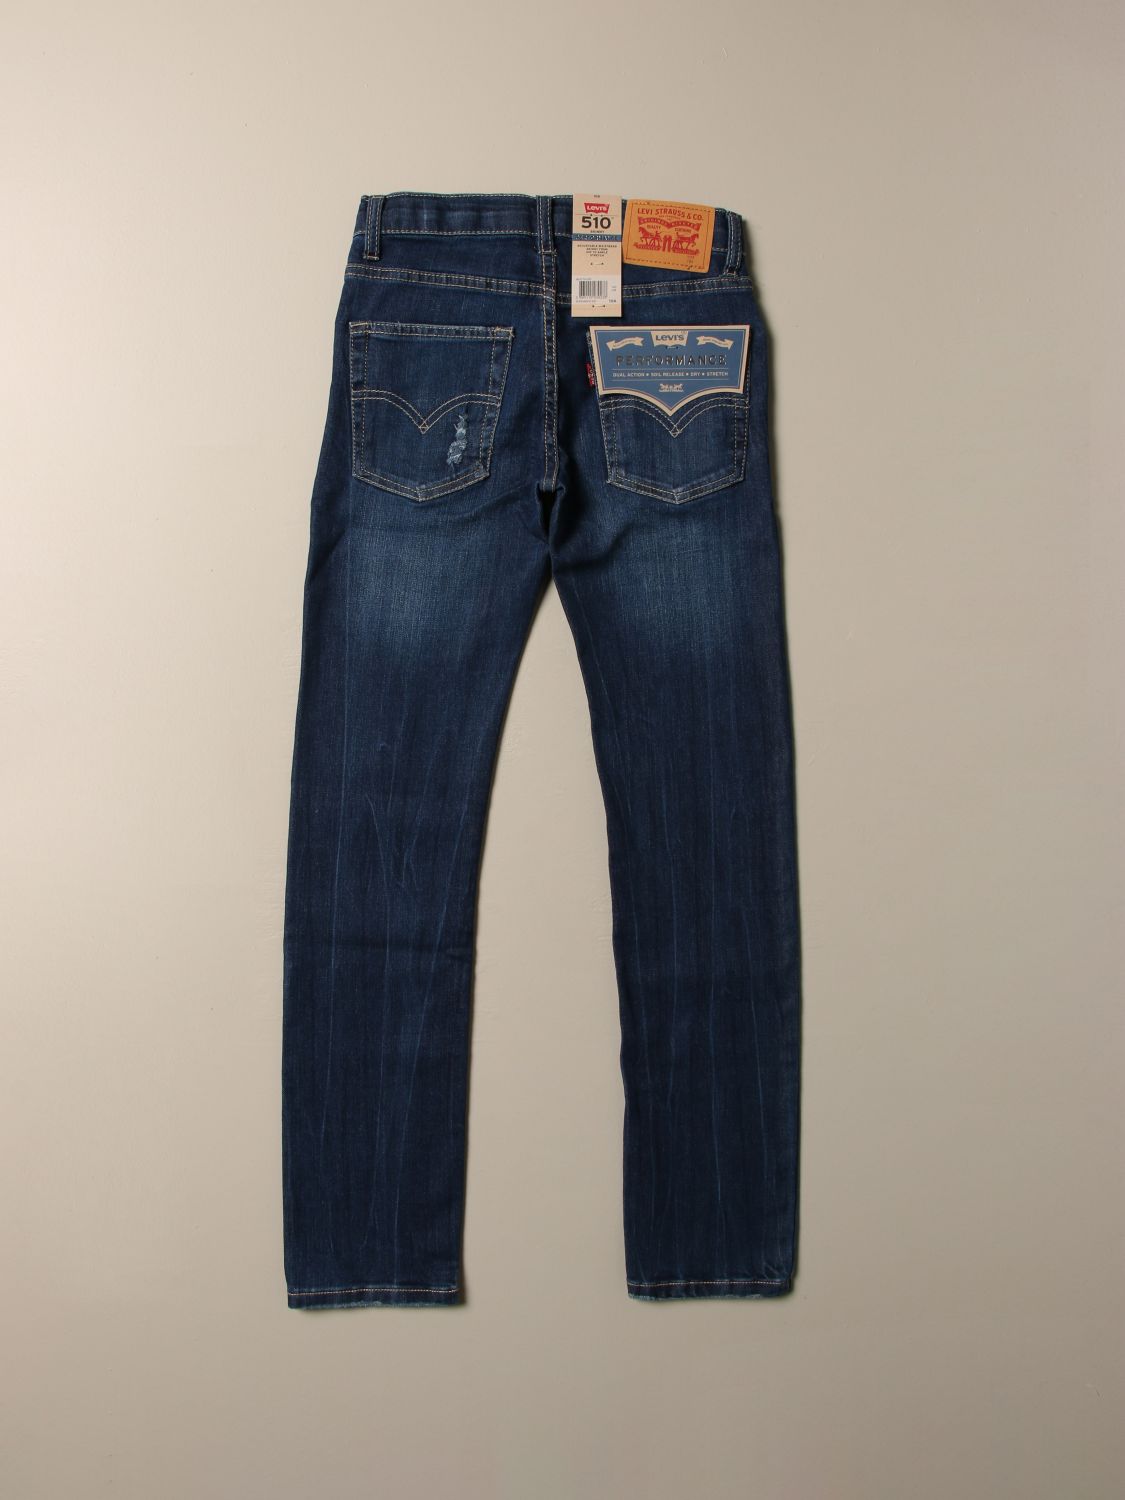 used jeans company